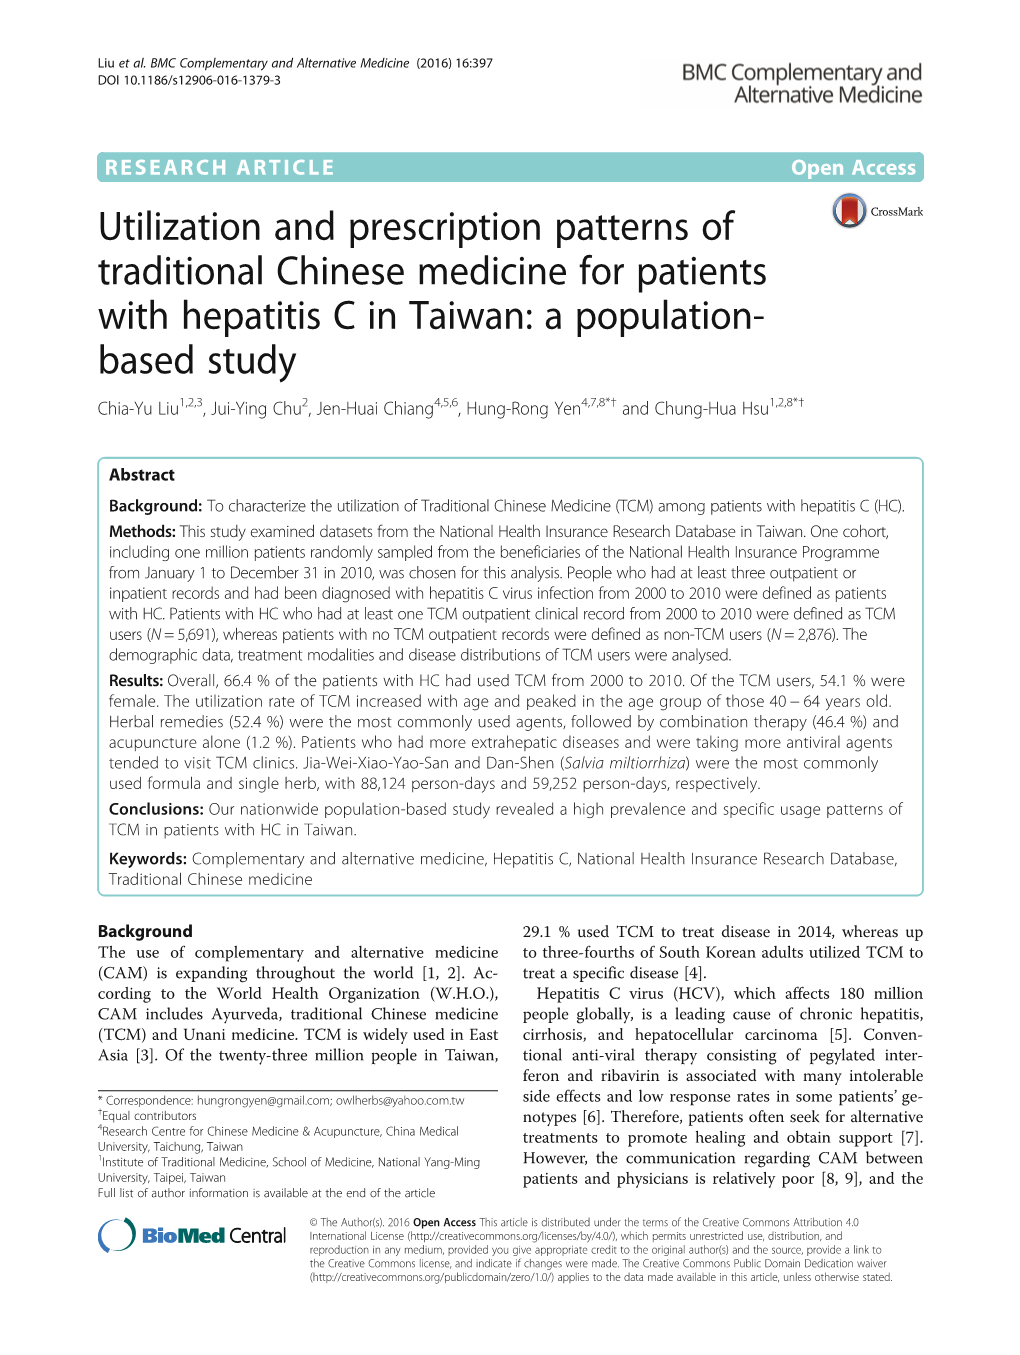 Utilization and Prescription Patterns of Traditional Chinese Medicine For